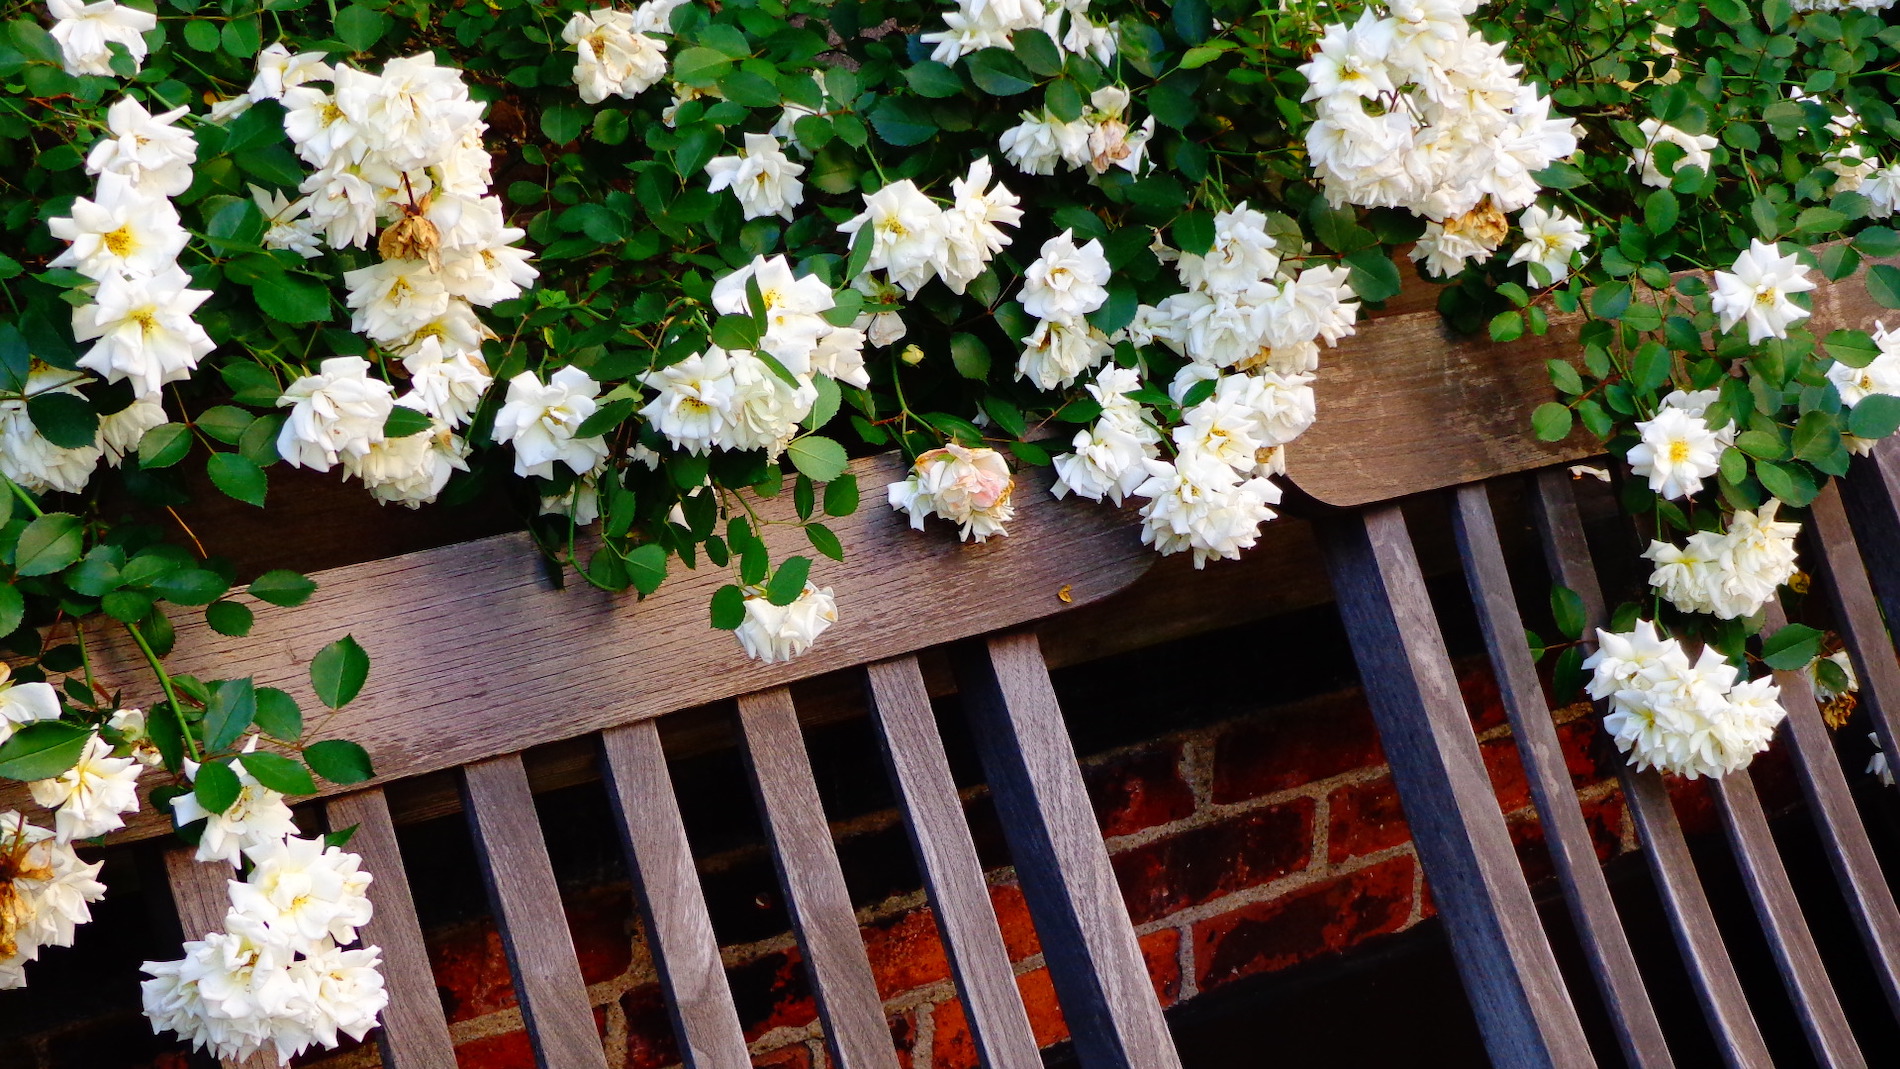 Teak Outdoor Benches and White Rose Blossoms